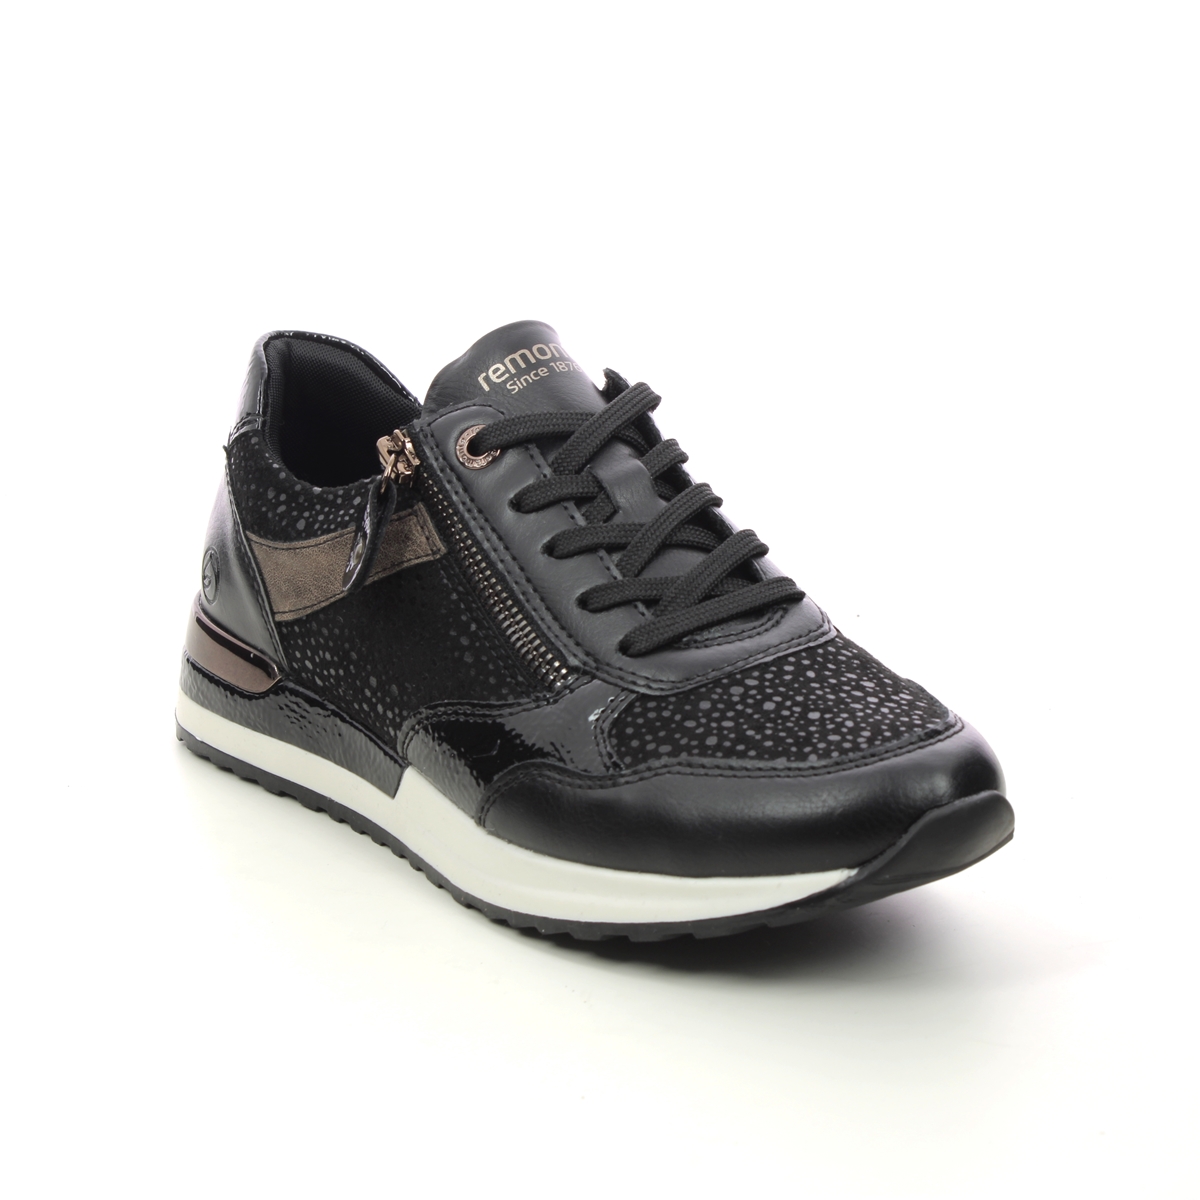 Remonte Vapour Lulea Black Womens Trainers R2548-01 In Size 37 In Plain Black